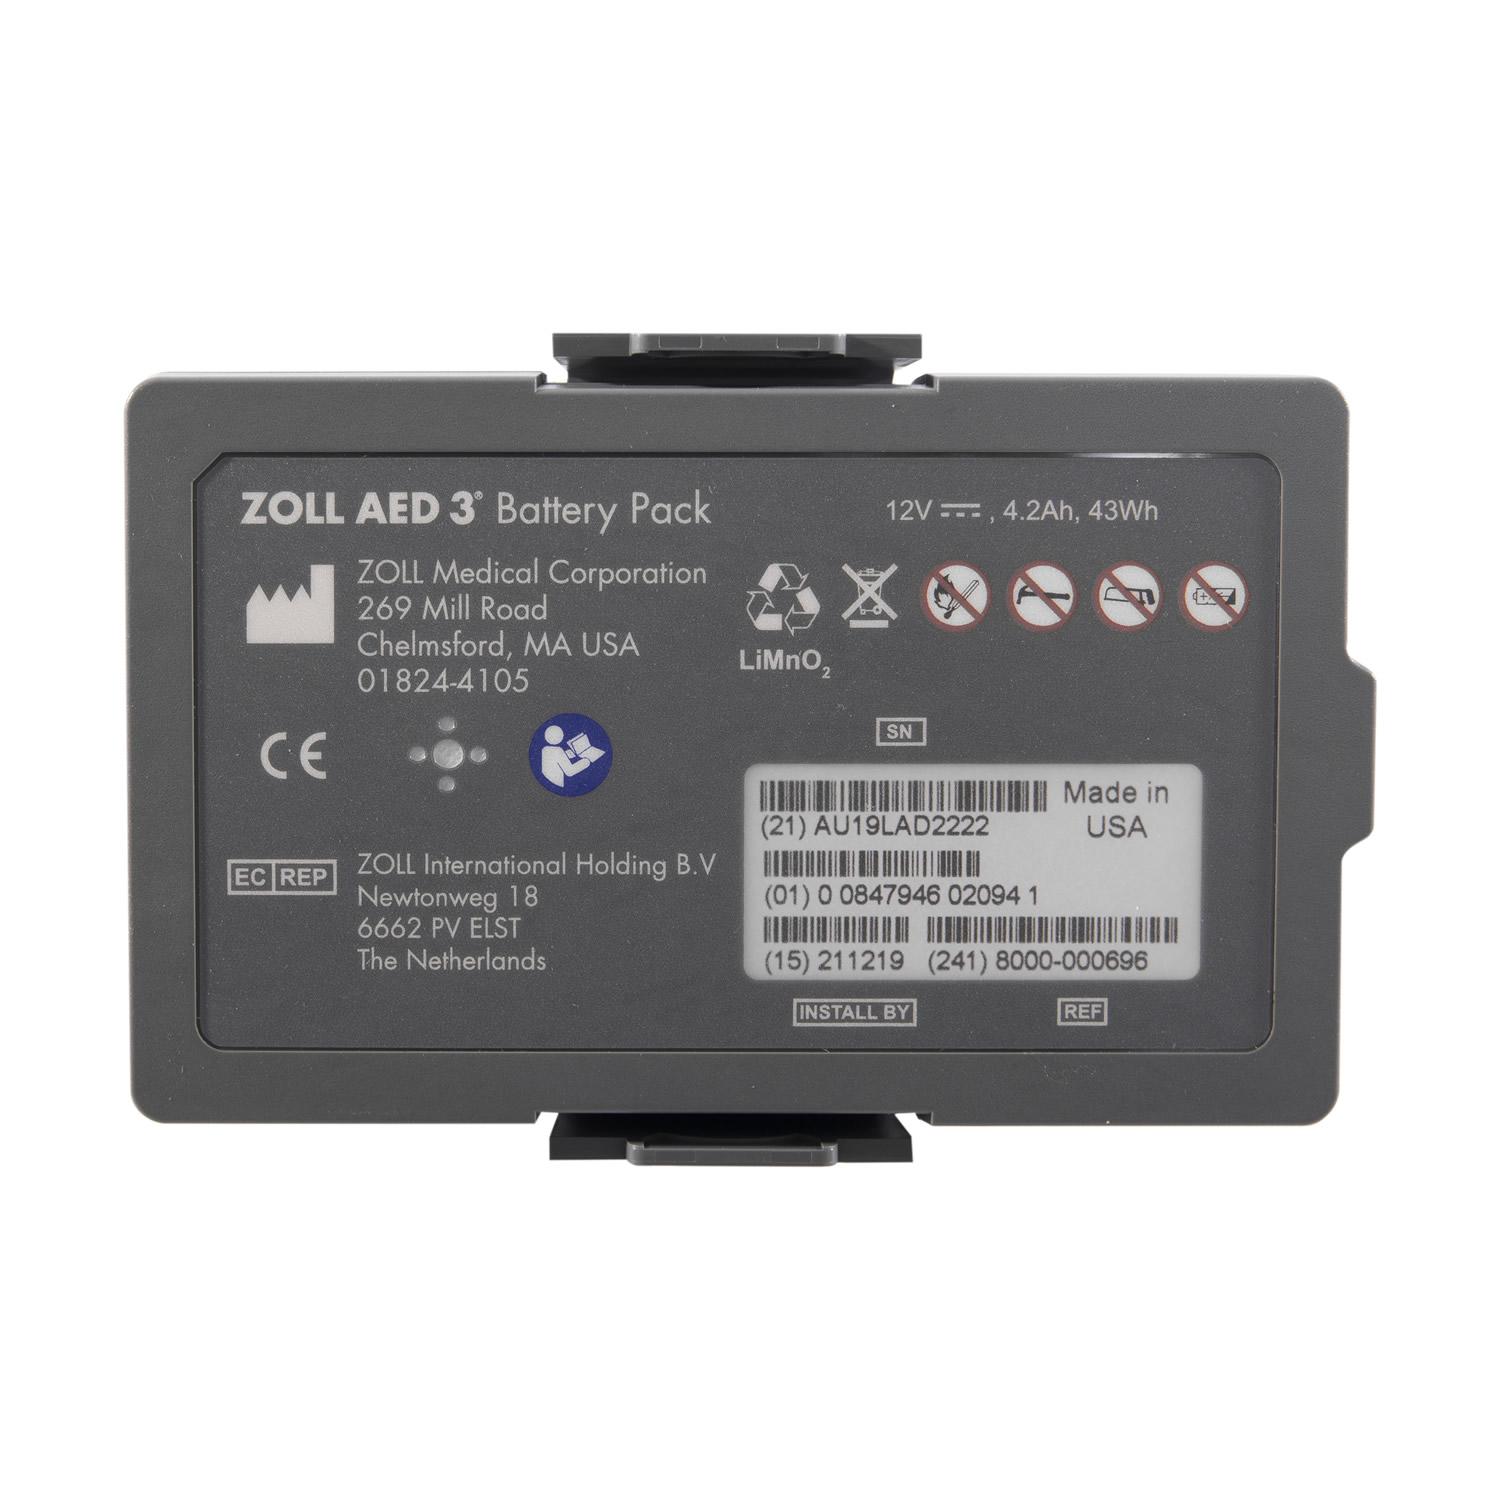 Zoll AED 3 Defibrillator Battery Pack